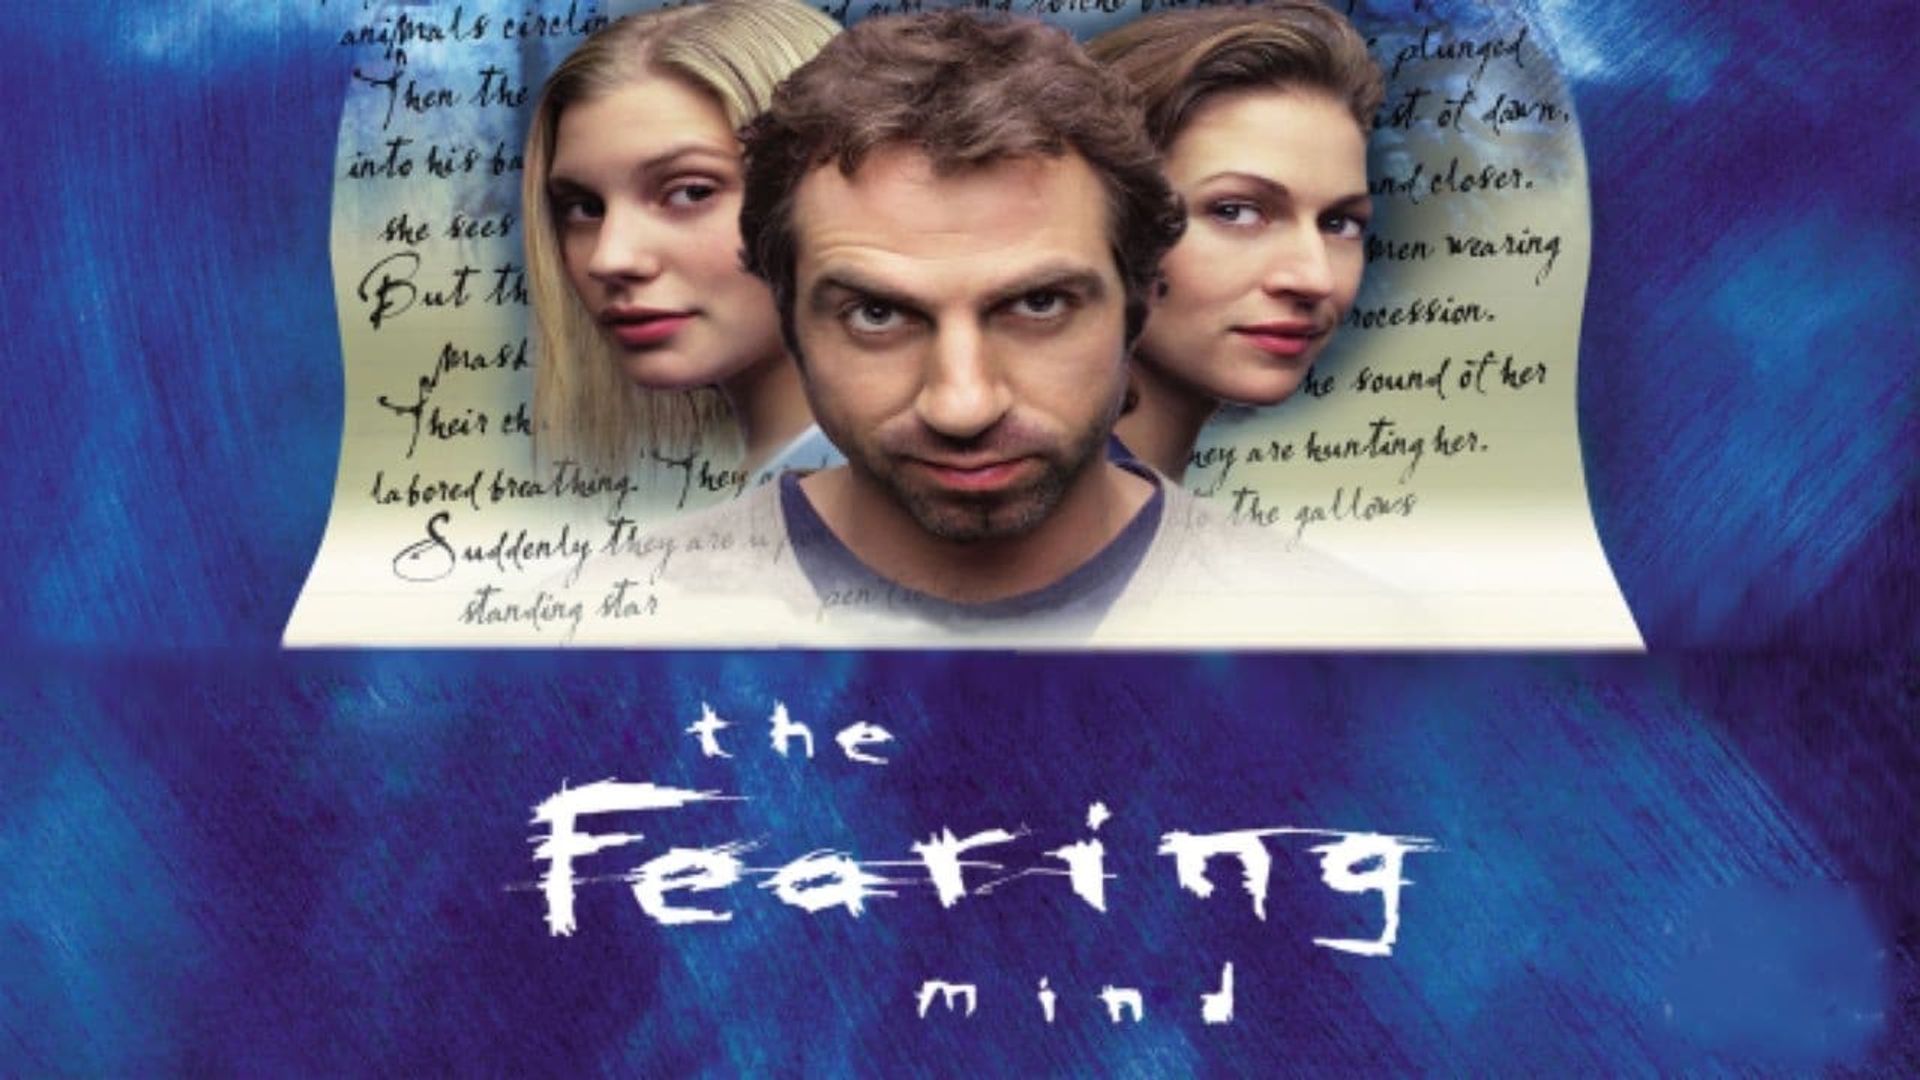 The Fearing Mind background